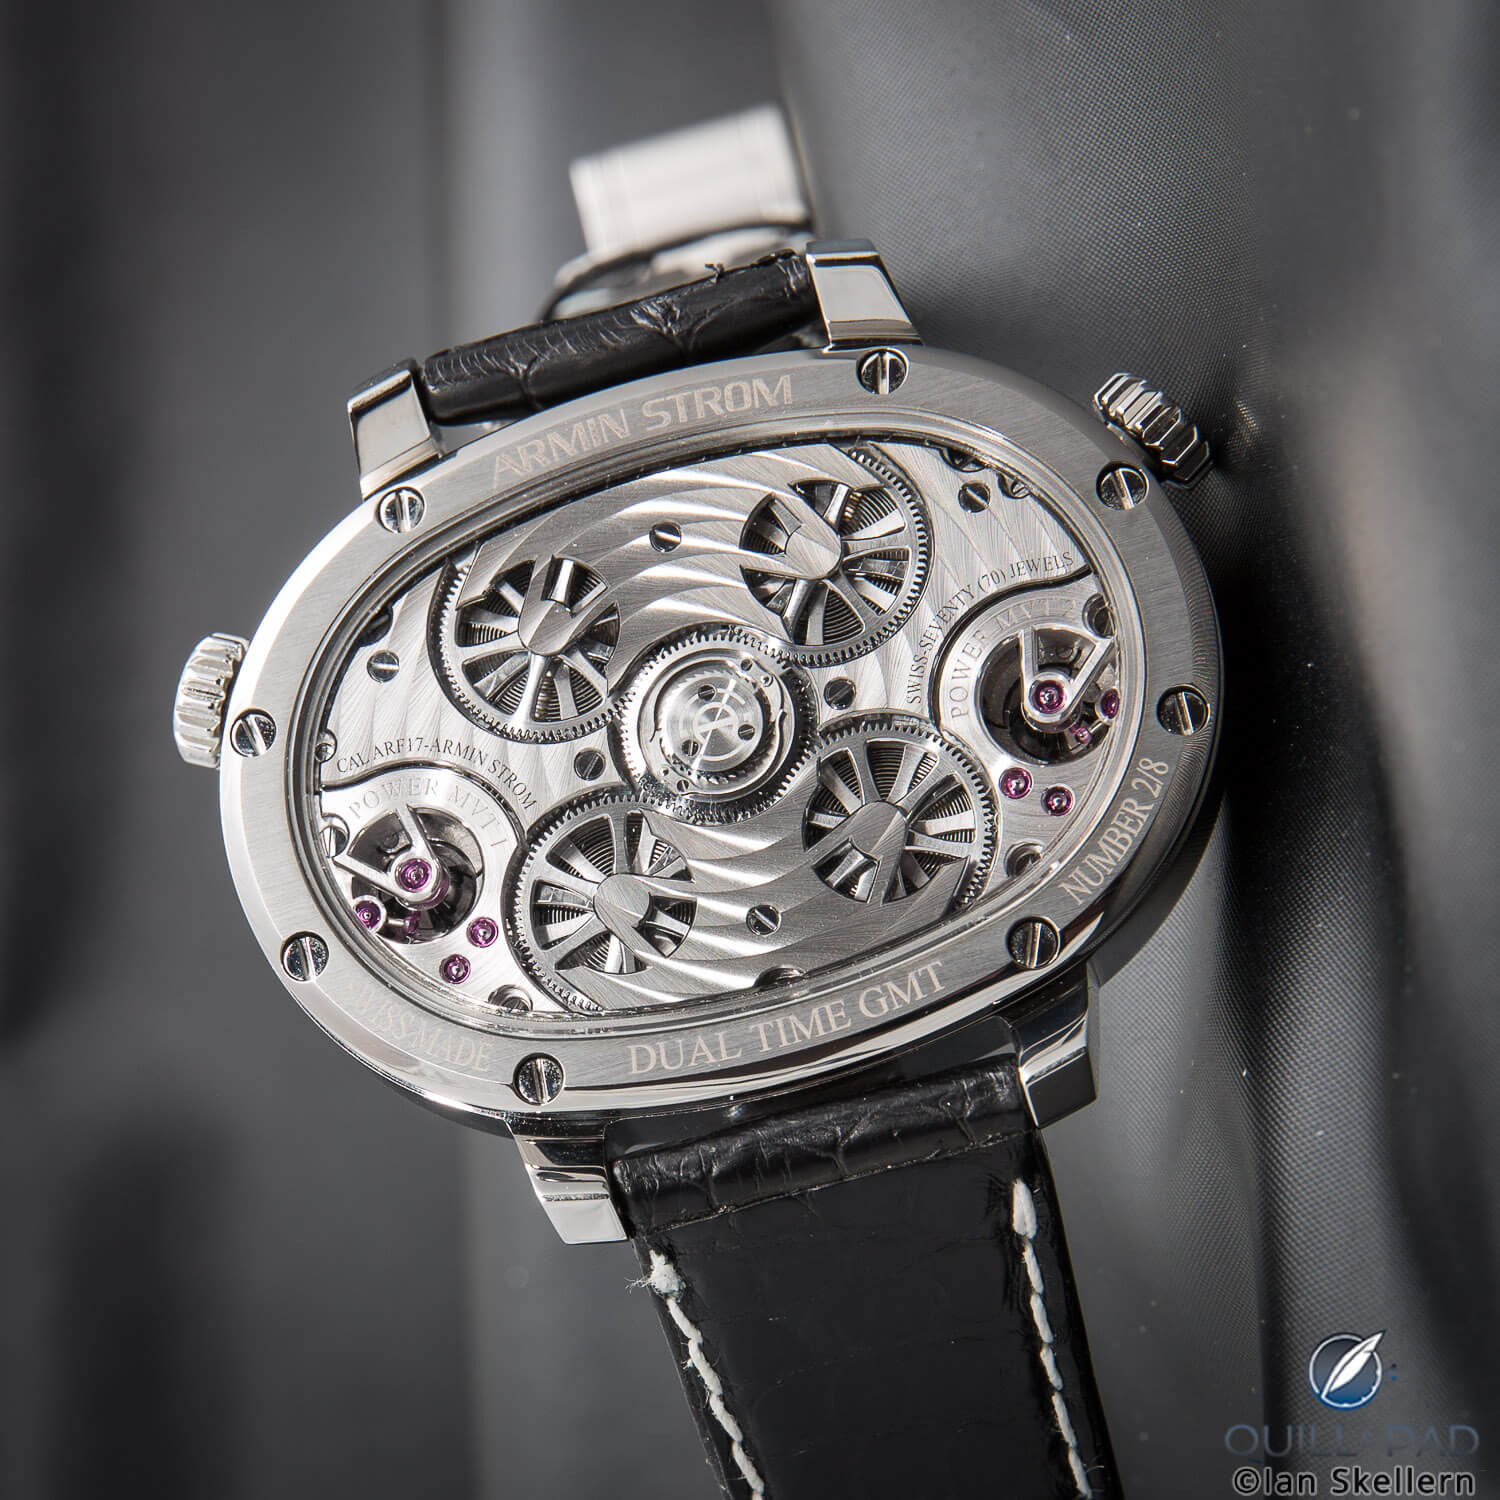 View through the display back of the Armin Strom Masterpiece 1 Dual Time Resonance on the wrist